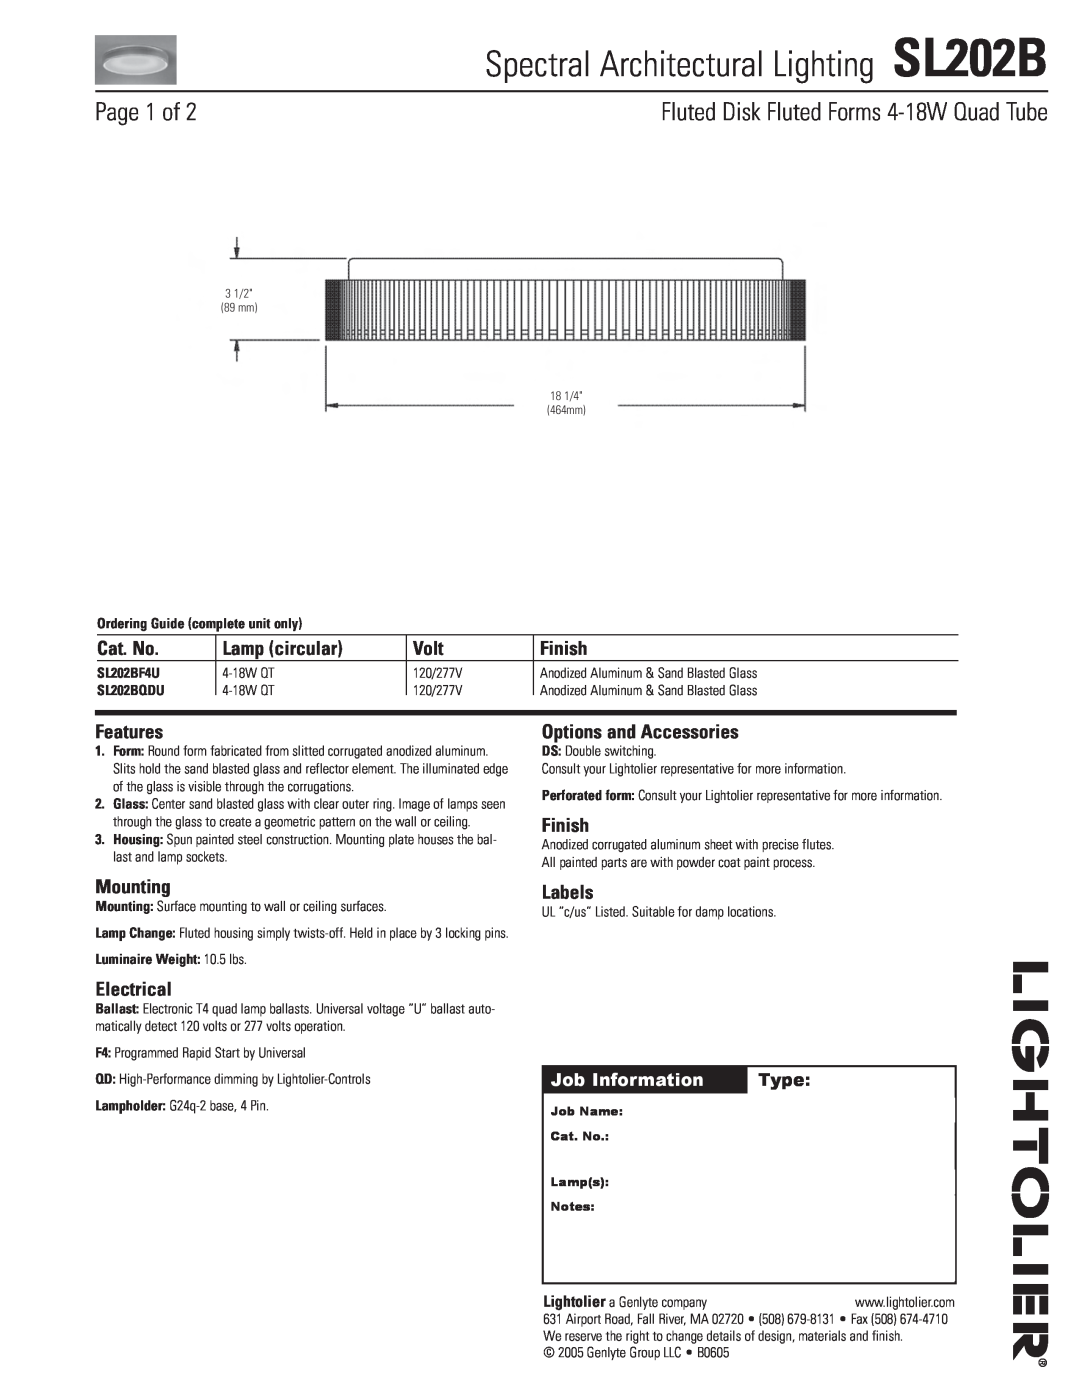 Lightolier manual Spectral Architectural Lighting SL202B, Page 1 of, Fluted Disk Fluted Forms 4-18WQuad Tube, Cat. No 